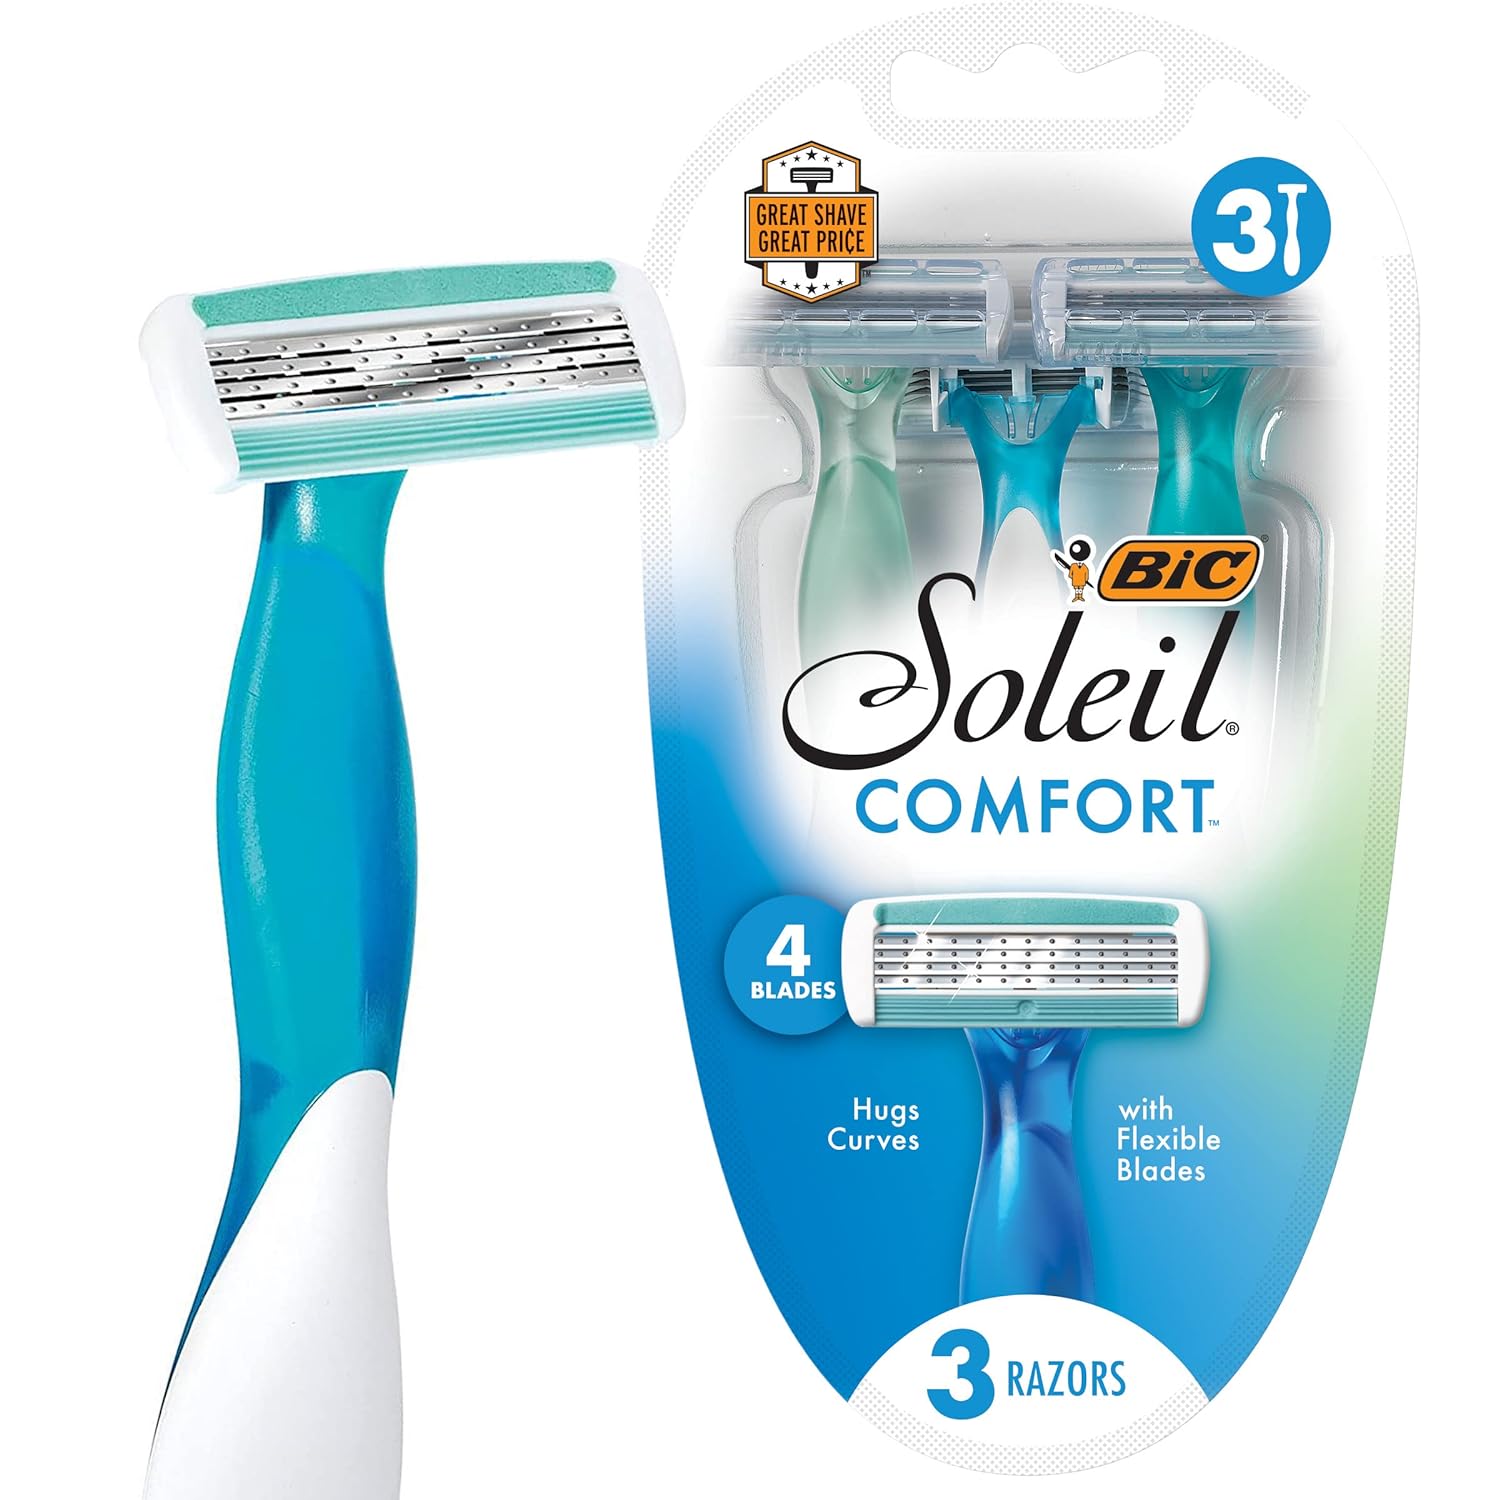 My skin is very sensitive and I have lots of skin allergies like fragrance, Lysol, exfoliants, etc. I have tried just about every budget razor that you can find in the grocery store, at Target, or at CVS. Now, I just order these from Amazon, especially if I cannot find them right away in store.These are the only razors that NEVER leave me with bumps, irritation, rashes, or extreme dryness. There is absolutely nothing fancy about these razors in terms of the actual shave. It is a pretty standard 